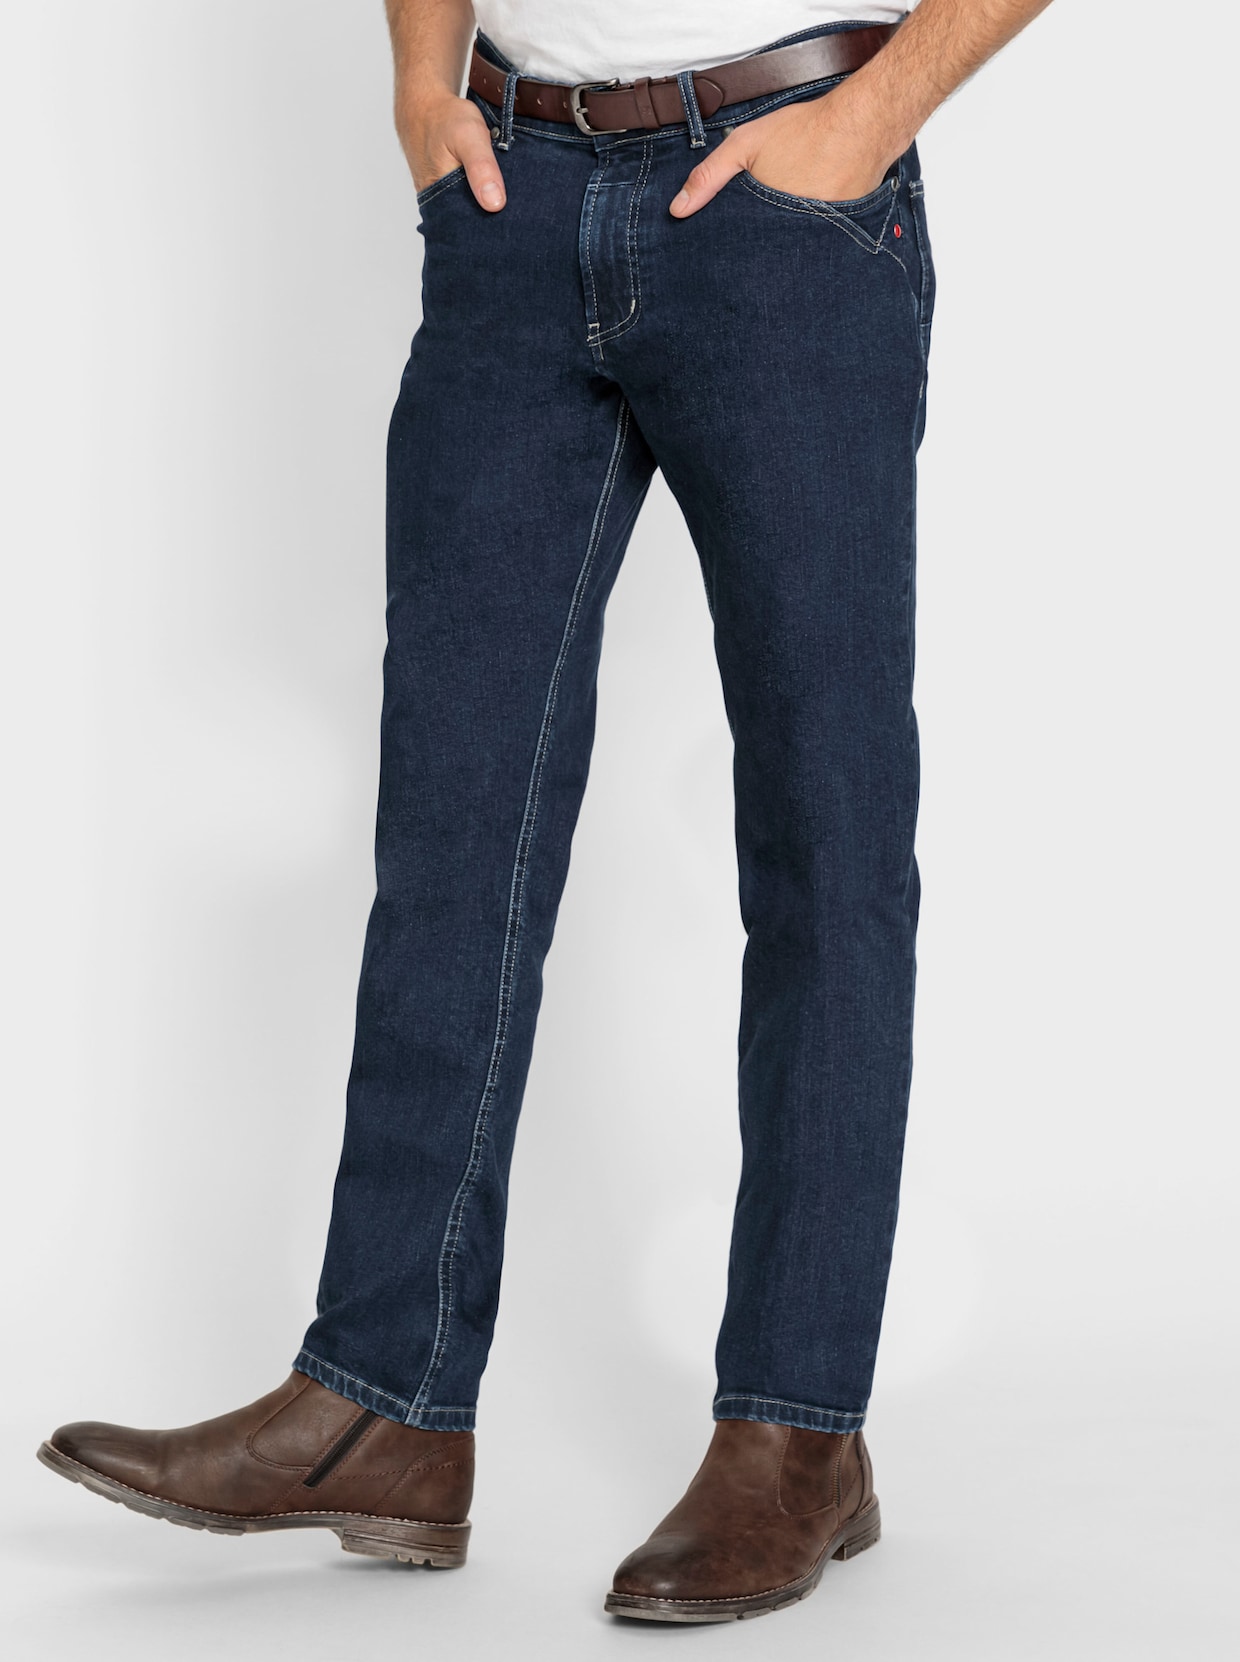 Jeans - darkblue stone-washed